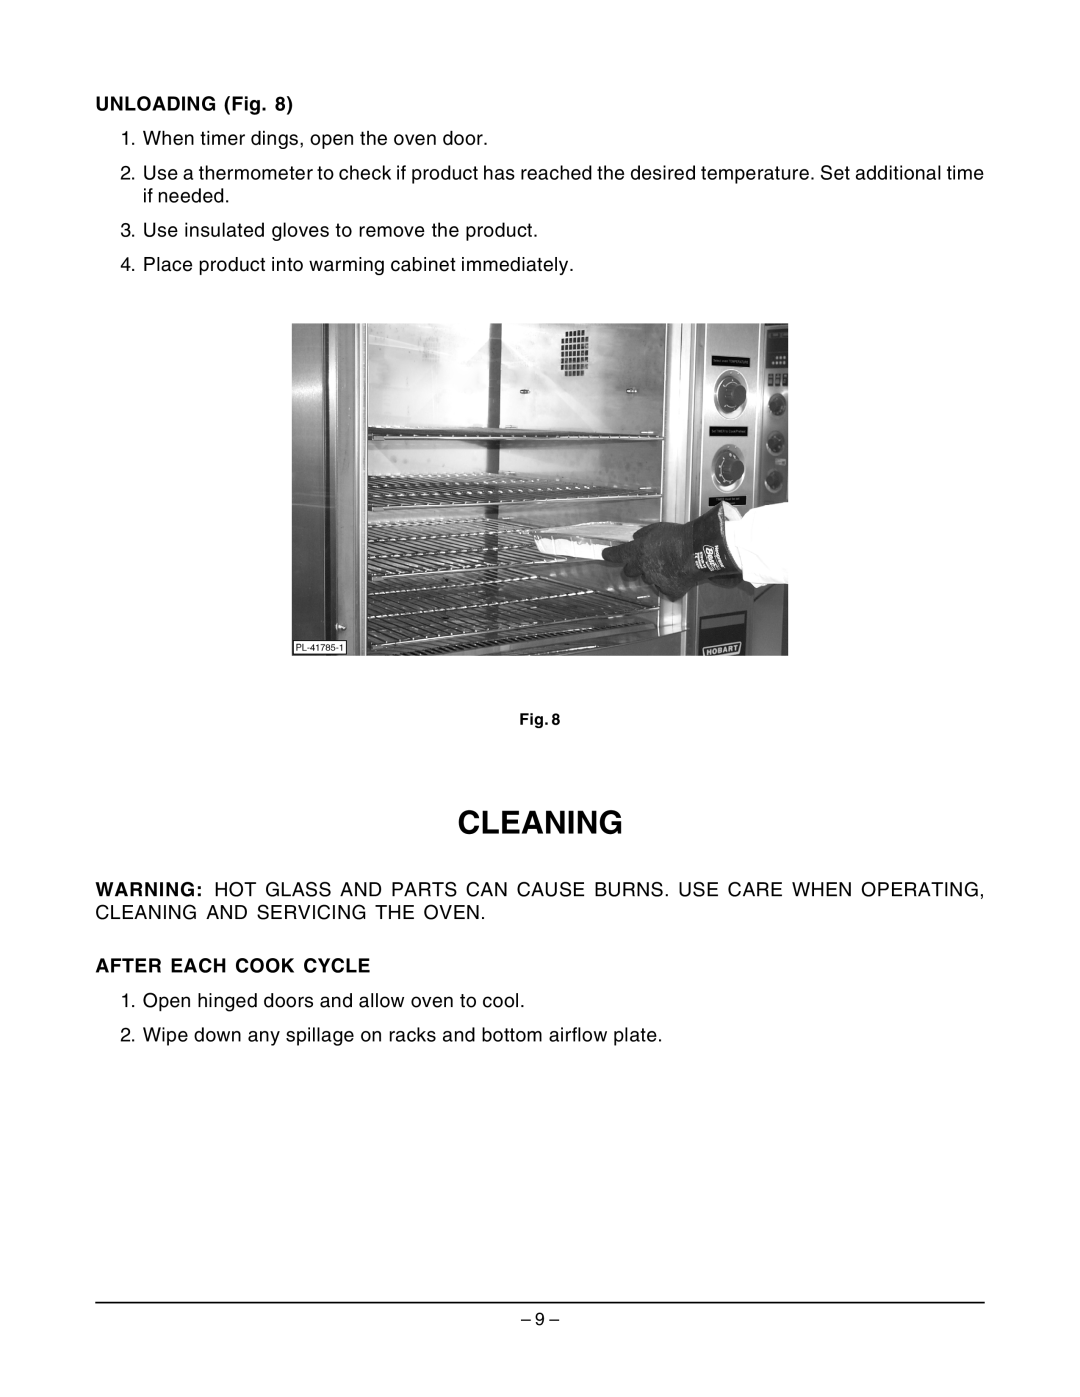 Hobart ML-132064 manual Cleaning, UNLOADING Fig, After Each Cook Cycle 